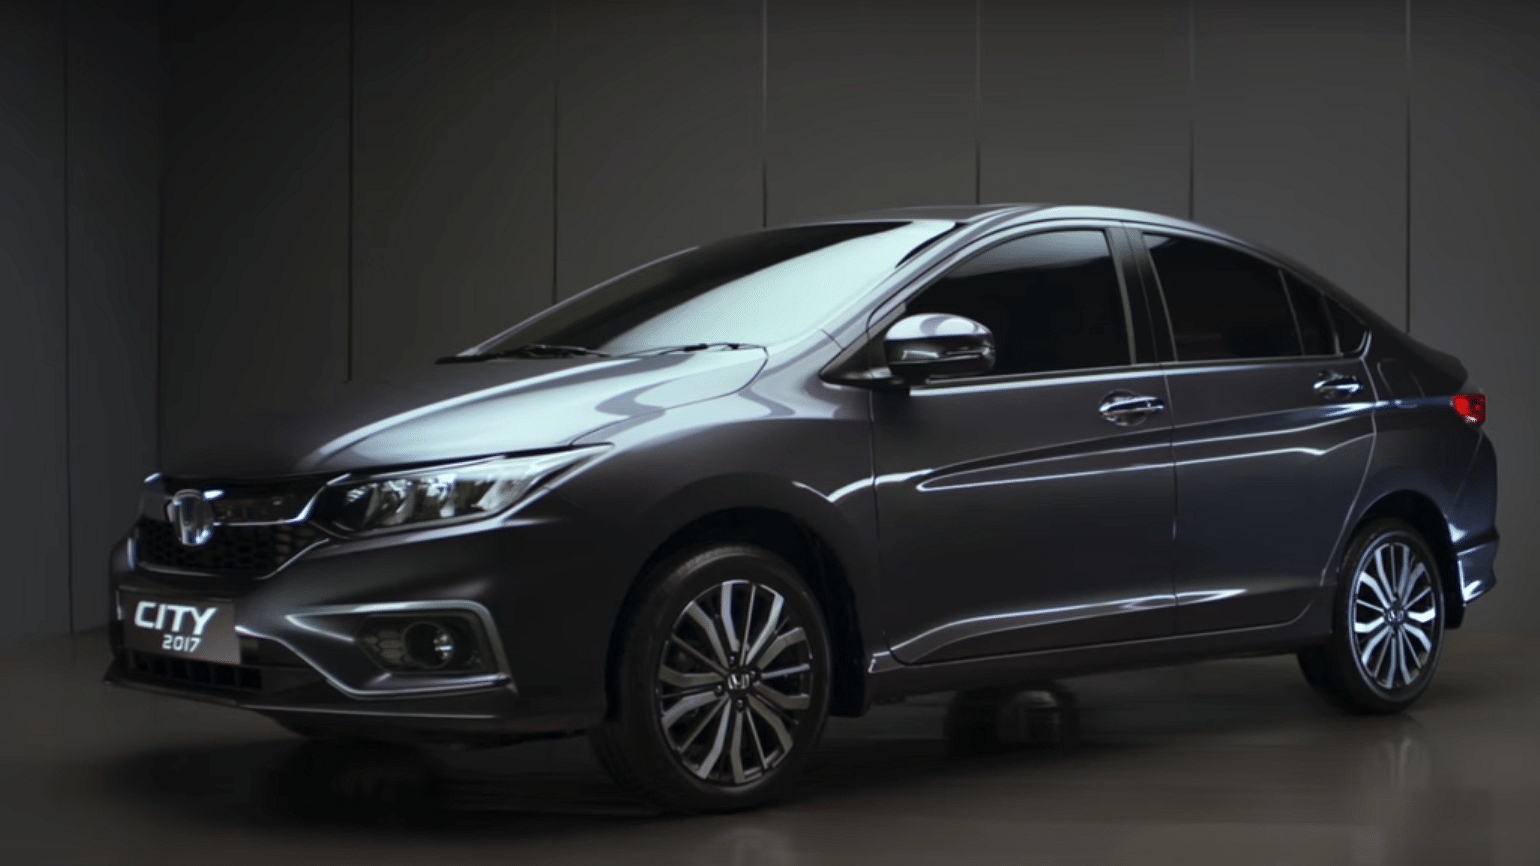 This is the all new Honda City 2017 facelift. (Photo Courtesy: YouTube/<a href="https://www.youtube.com/watch?v=JTxcx75QED0">Honda India</a>)